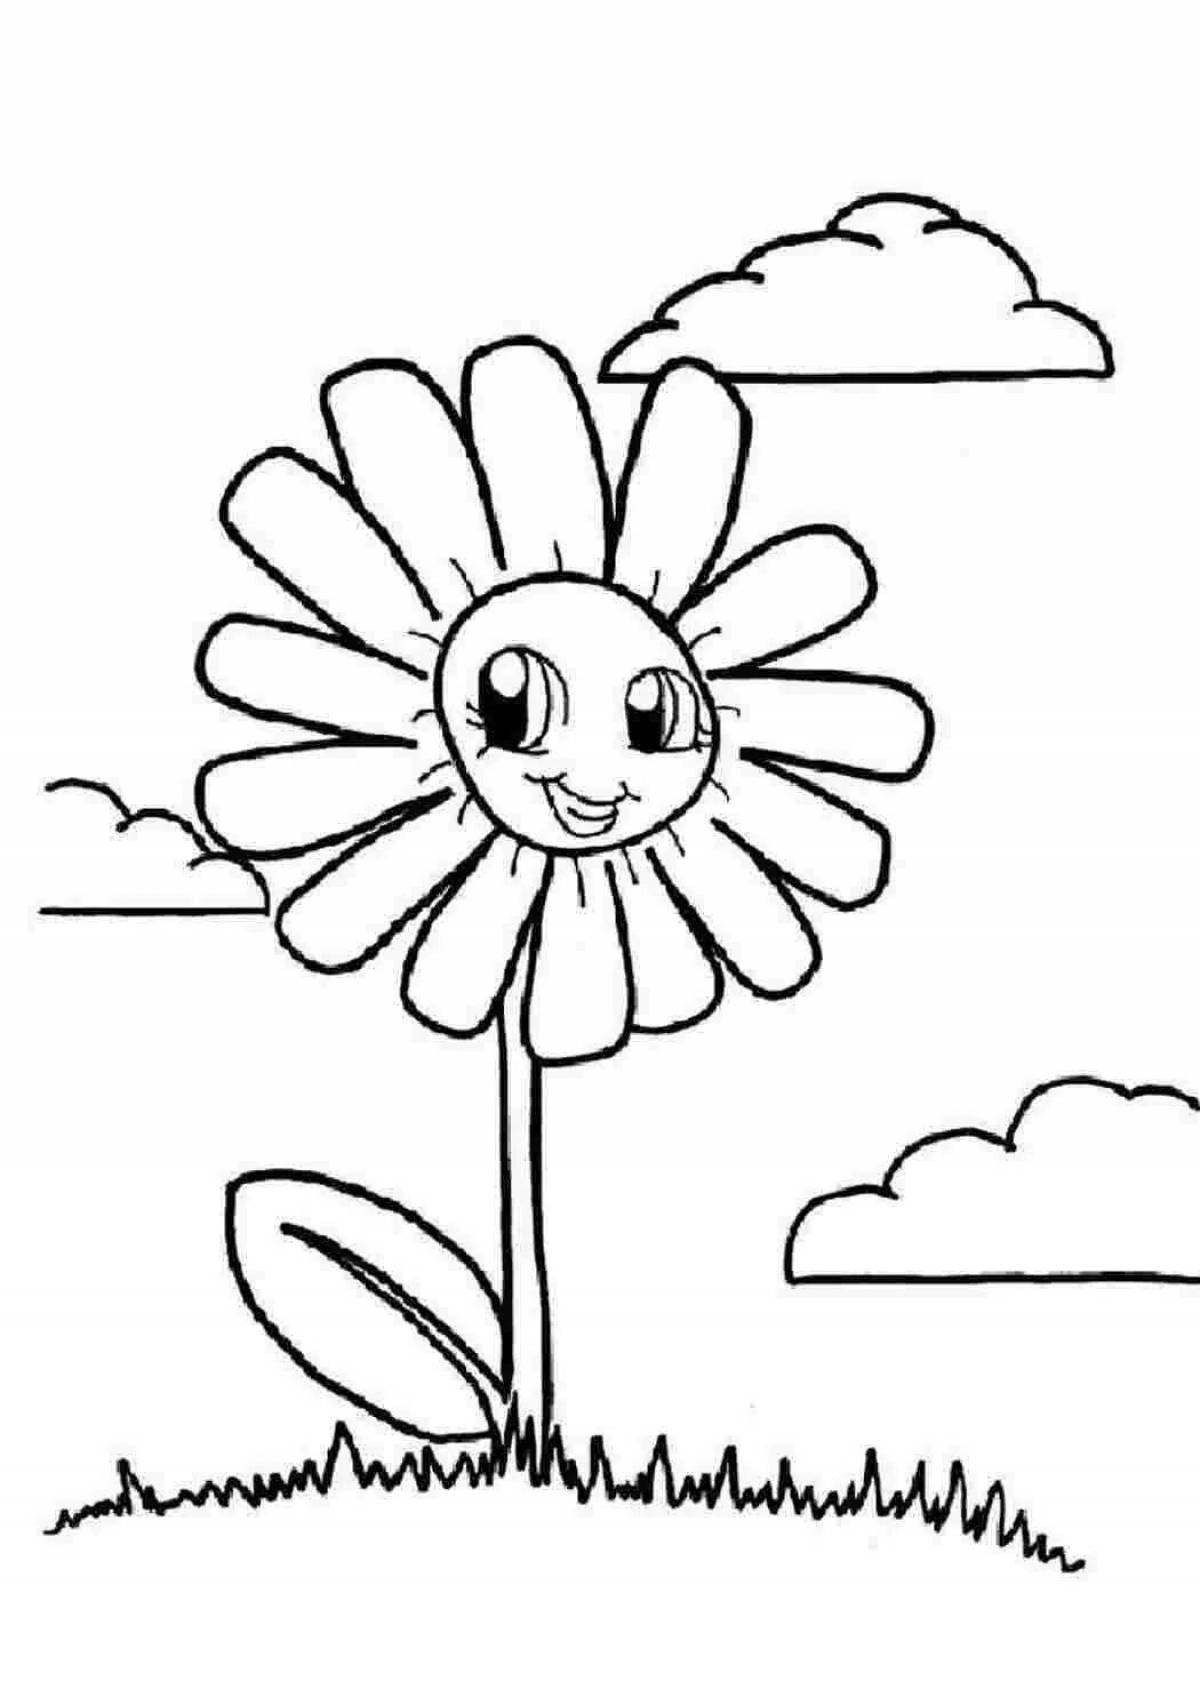 Awesome daisy coloring pages for kids